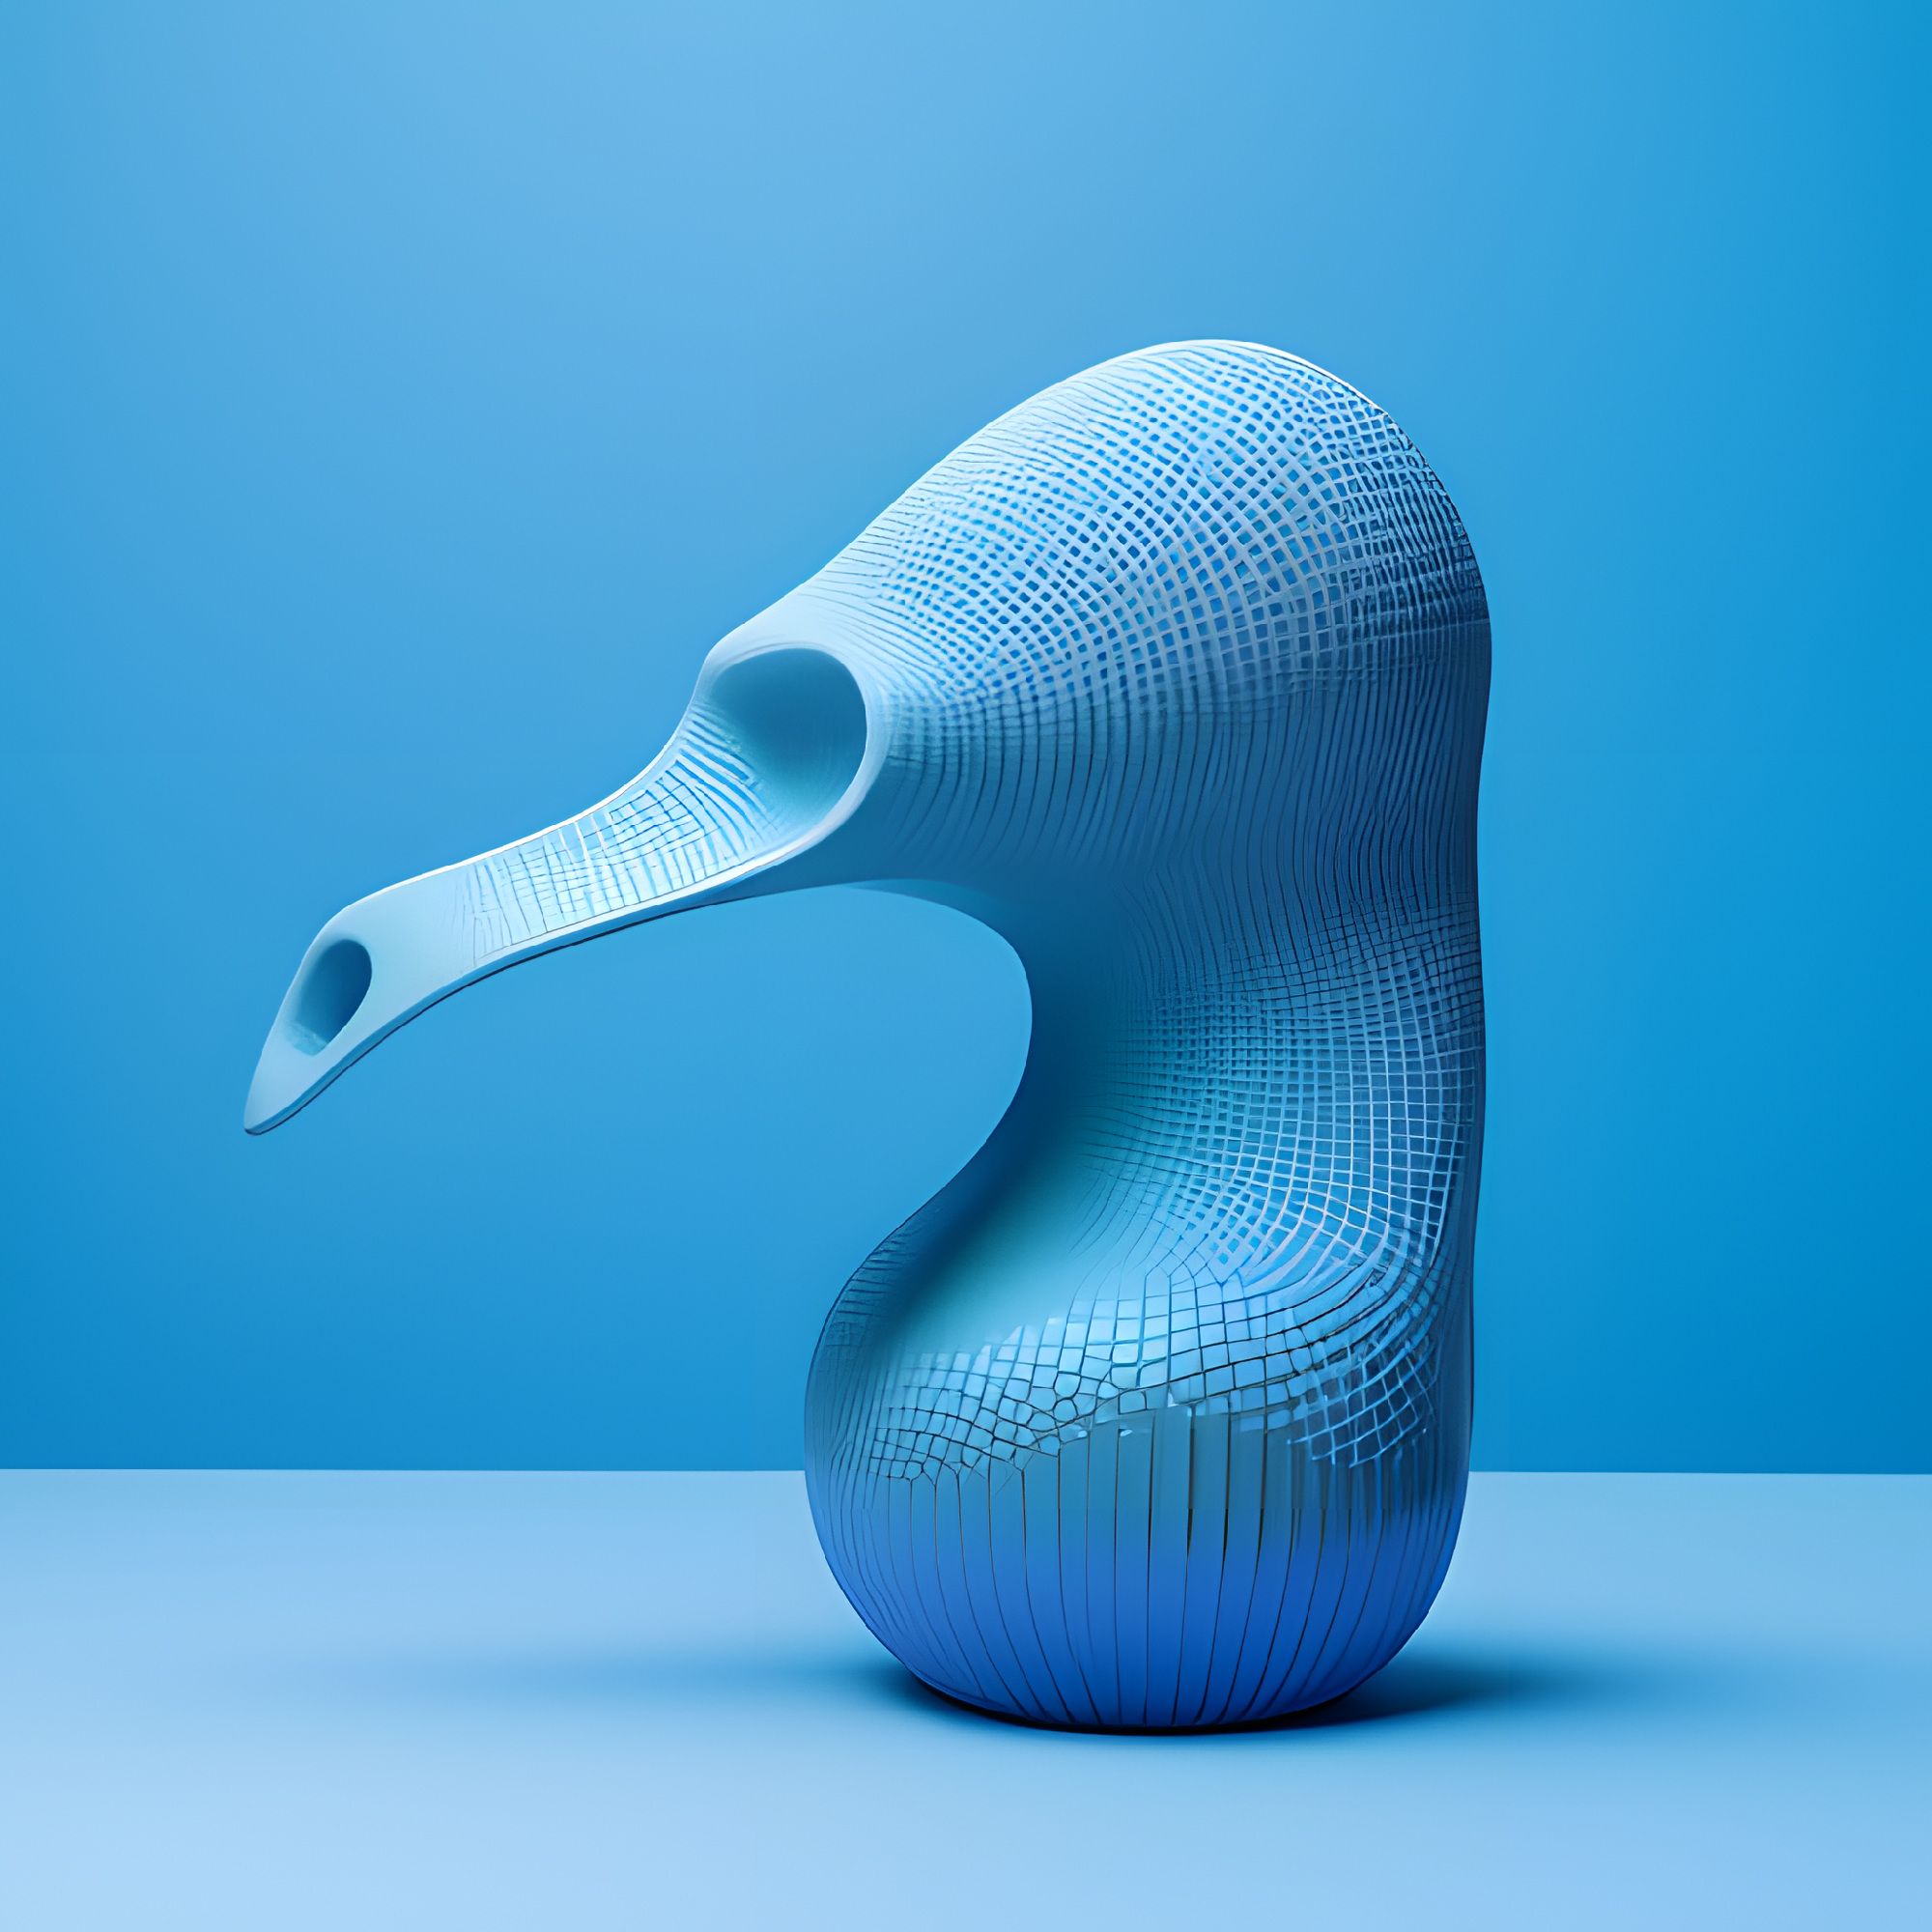 The thing - Product Design Rendering in Blue